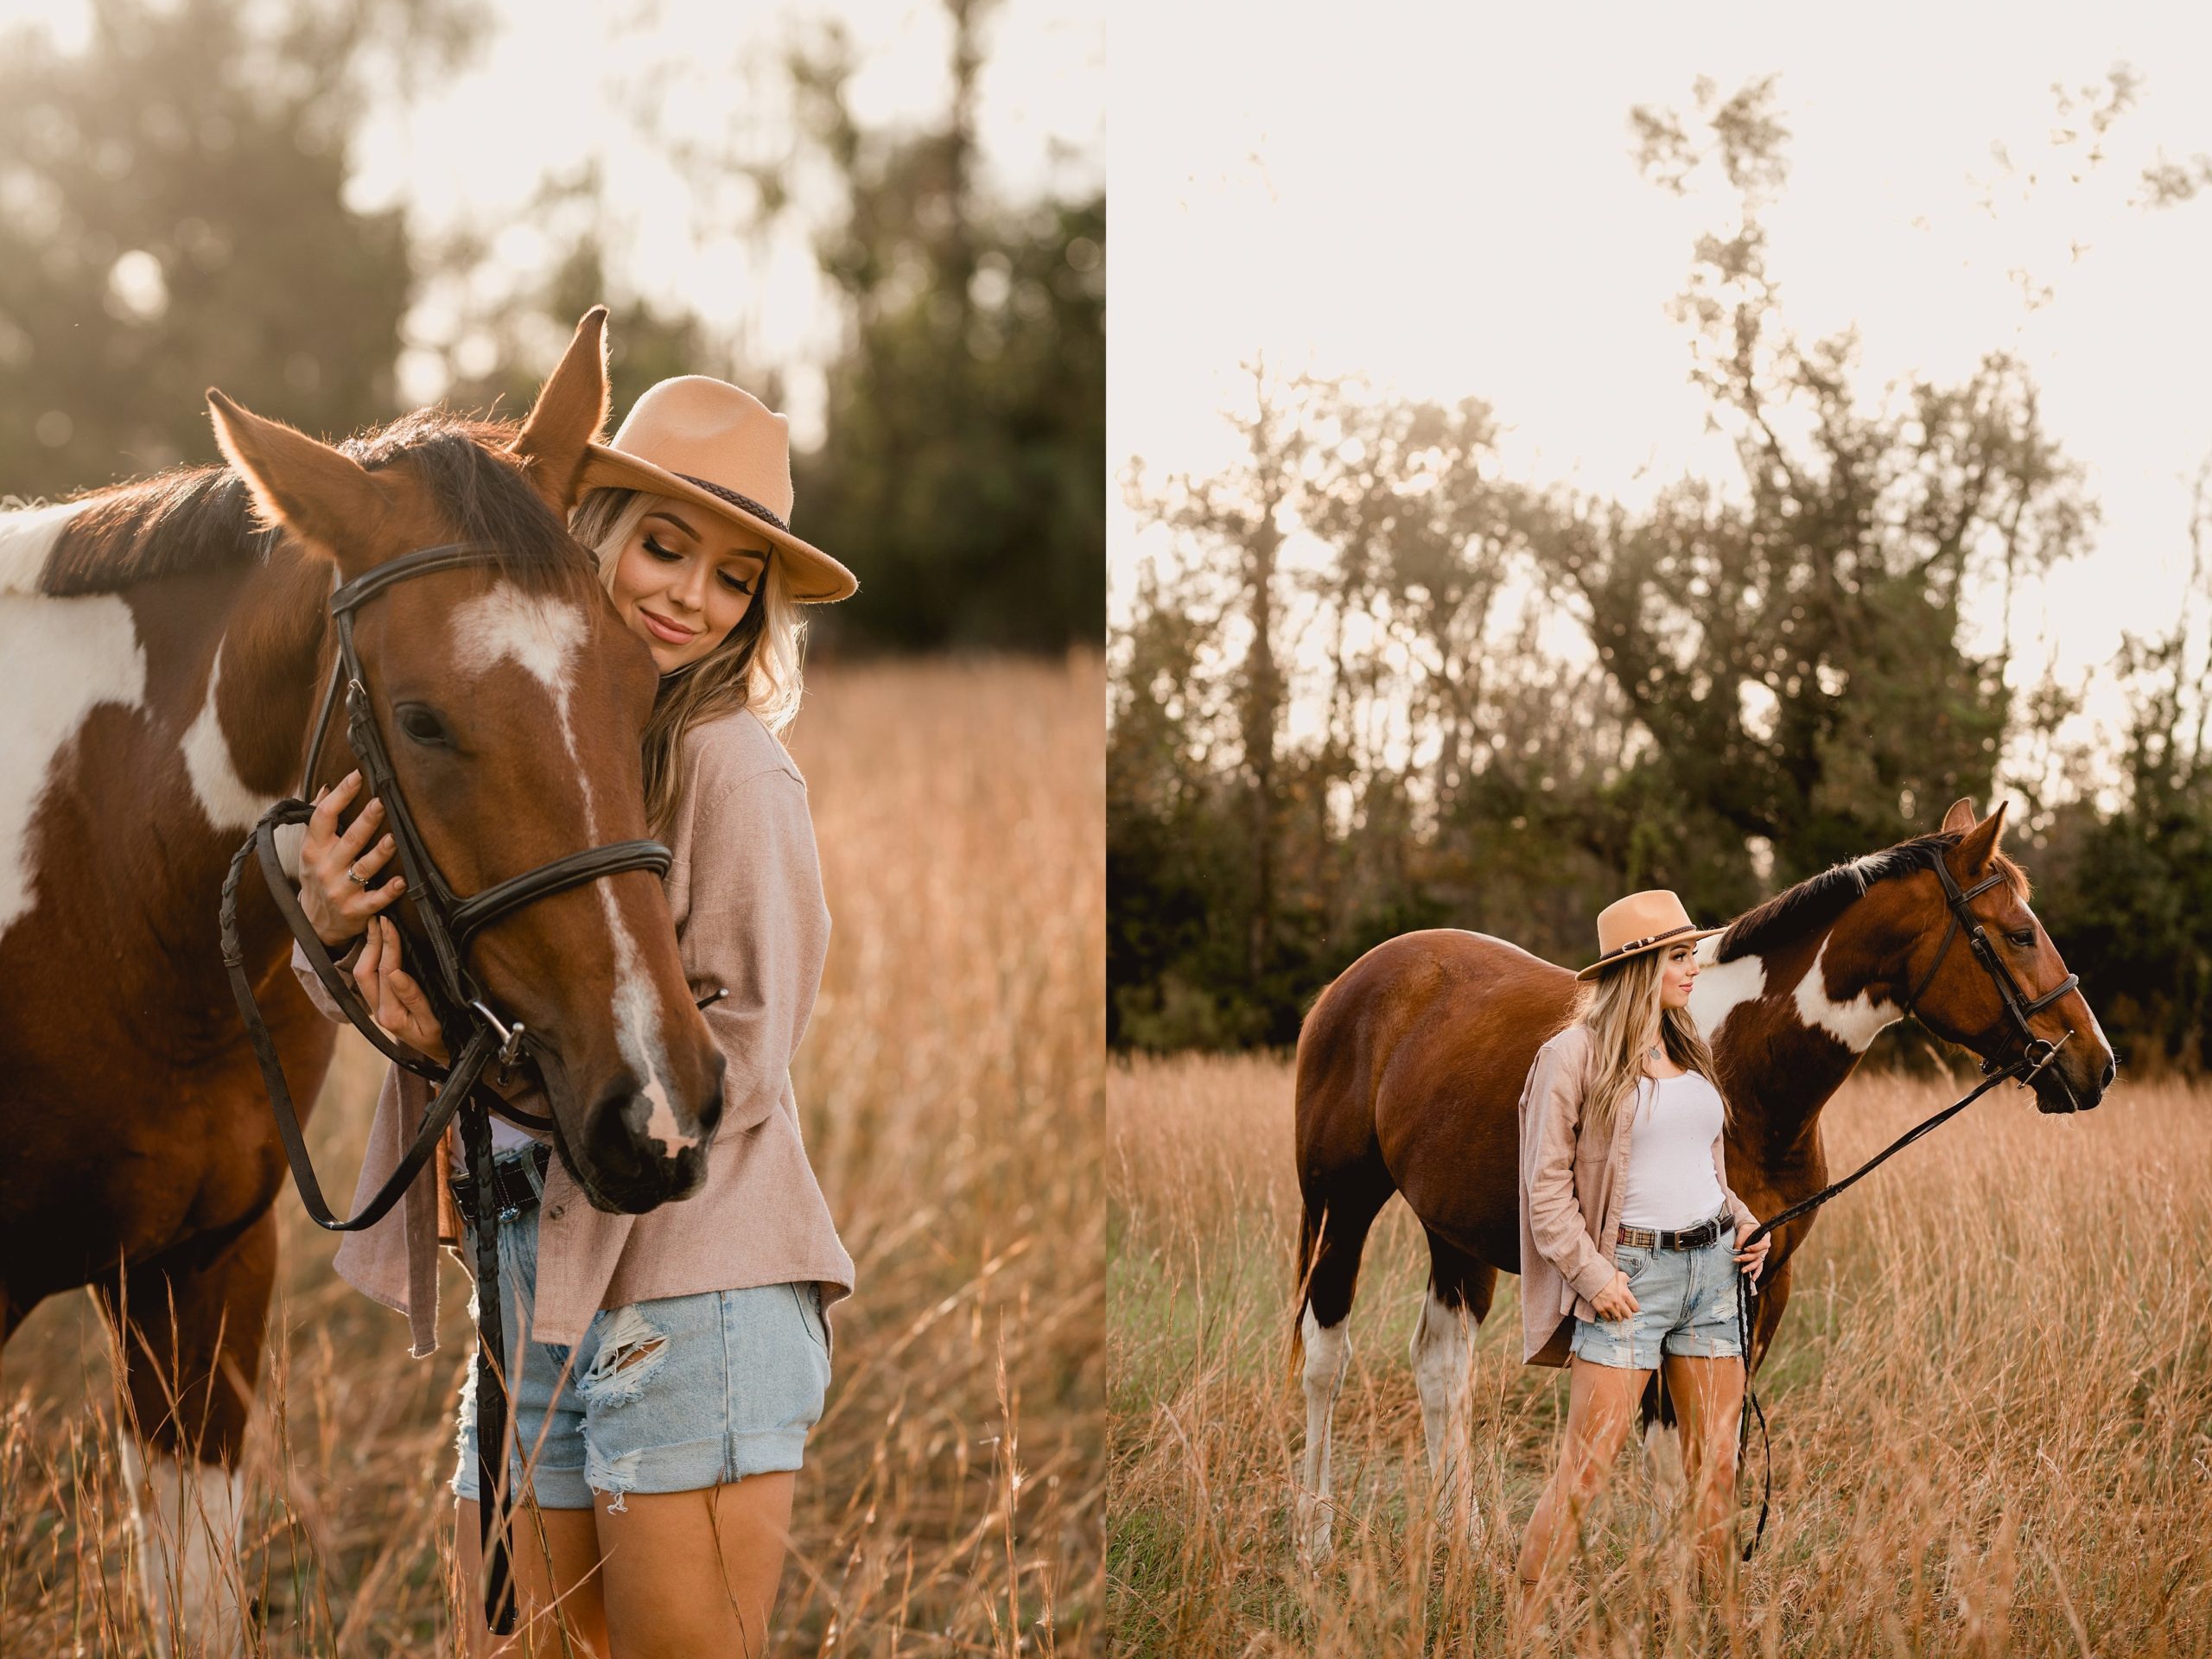 Beautiful horse and rider photos taken in tall winter grass at sunset.